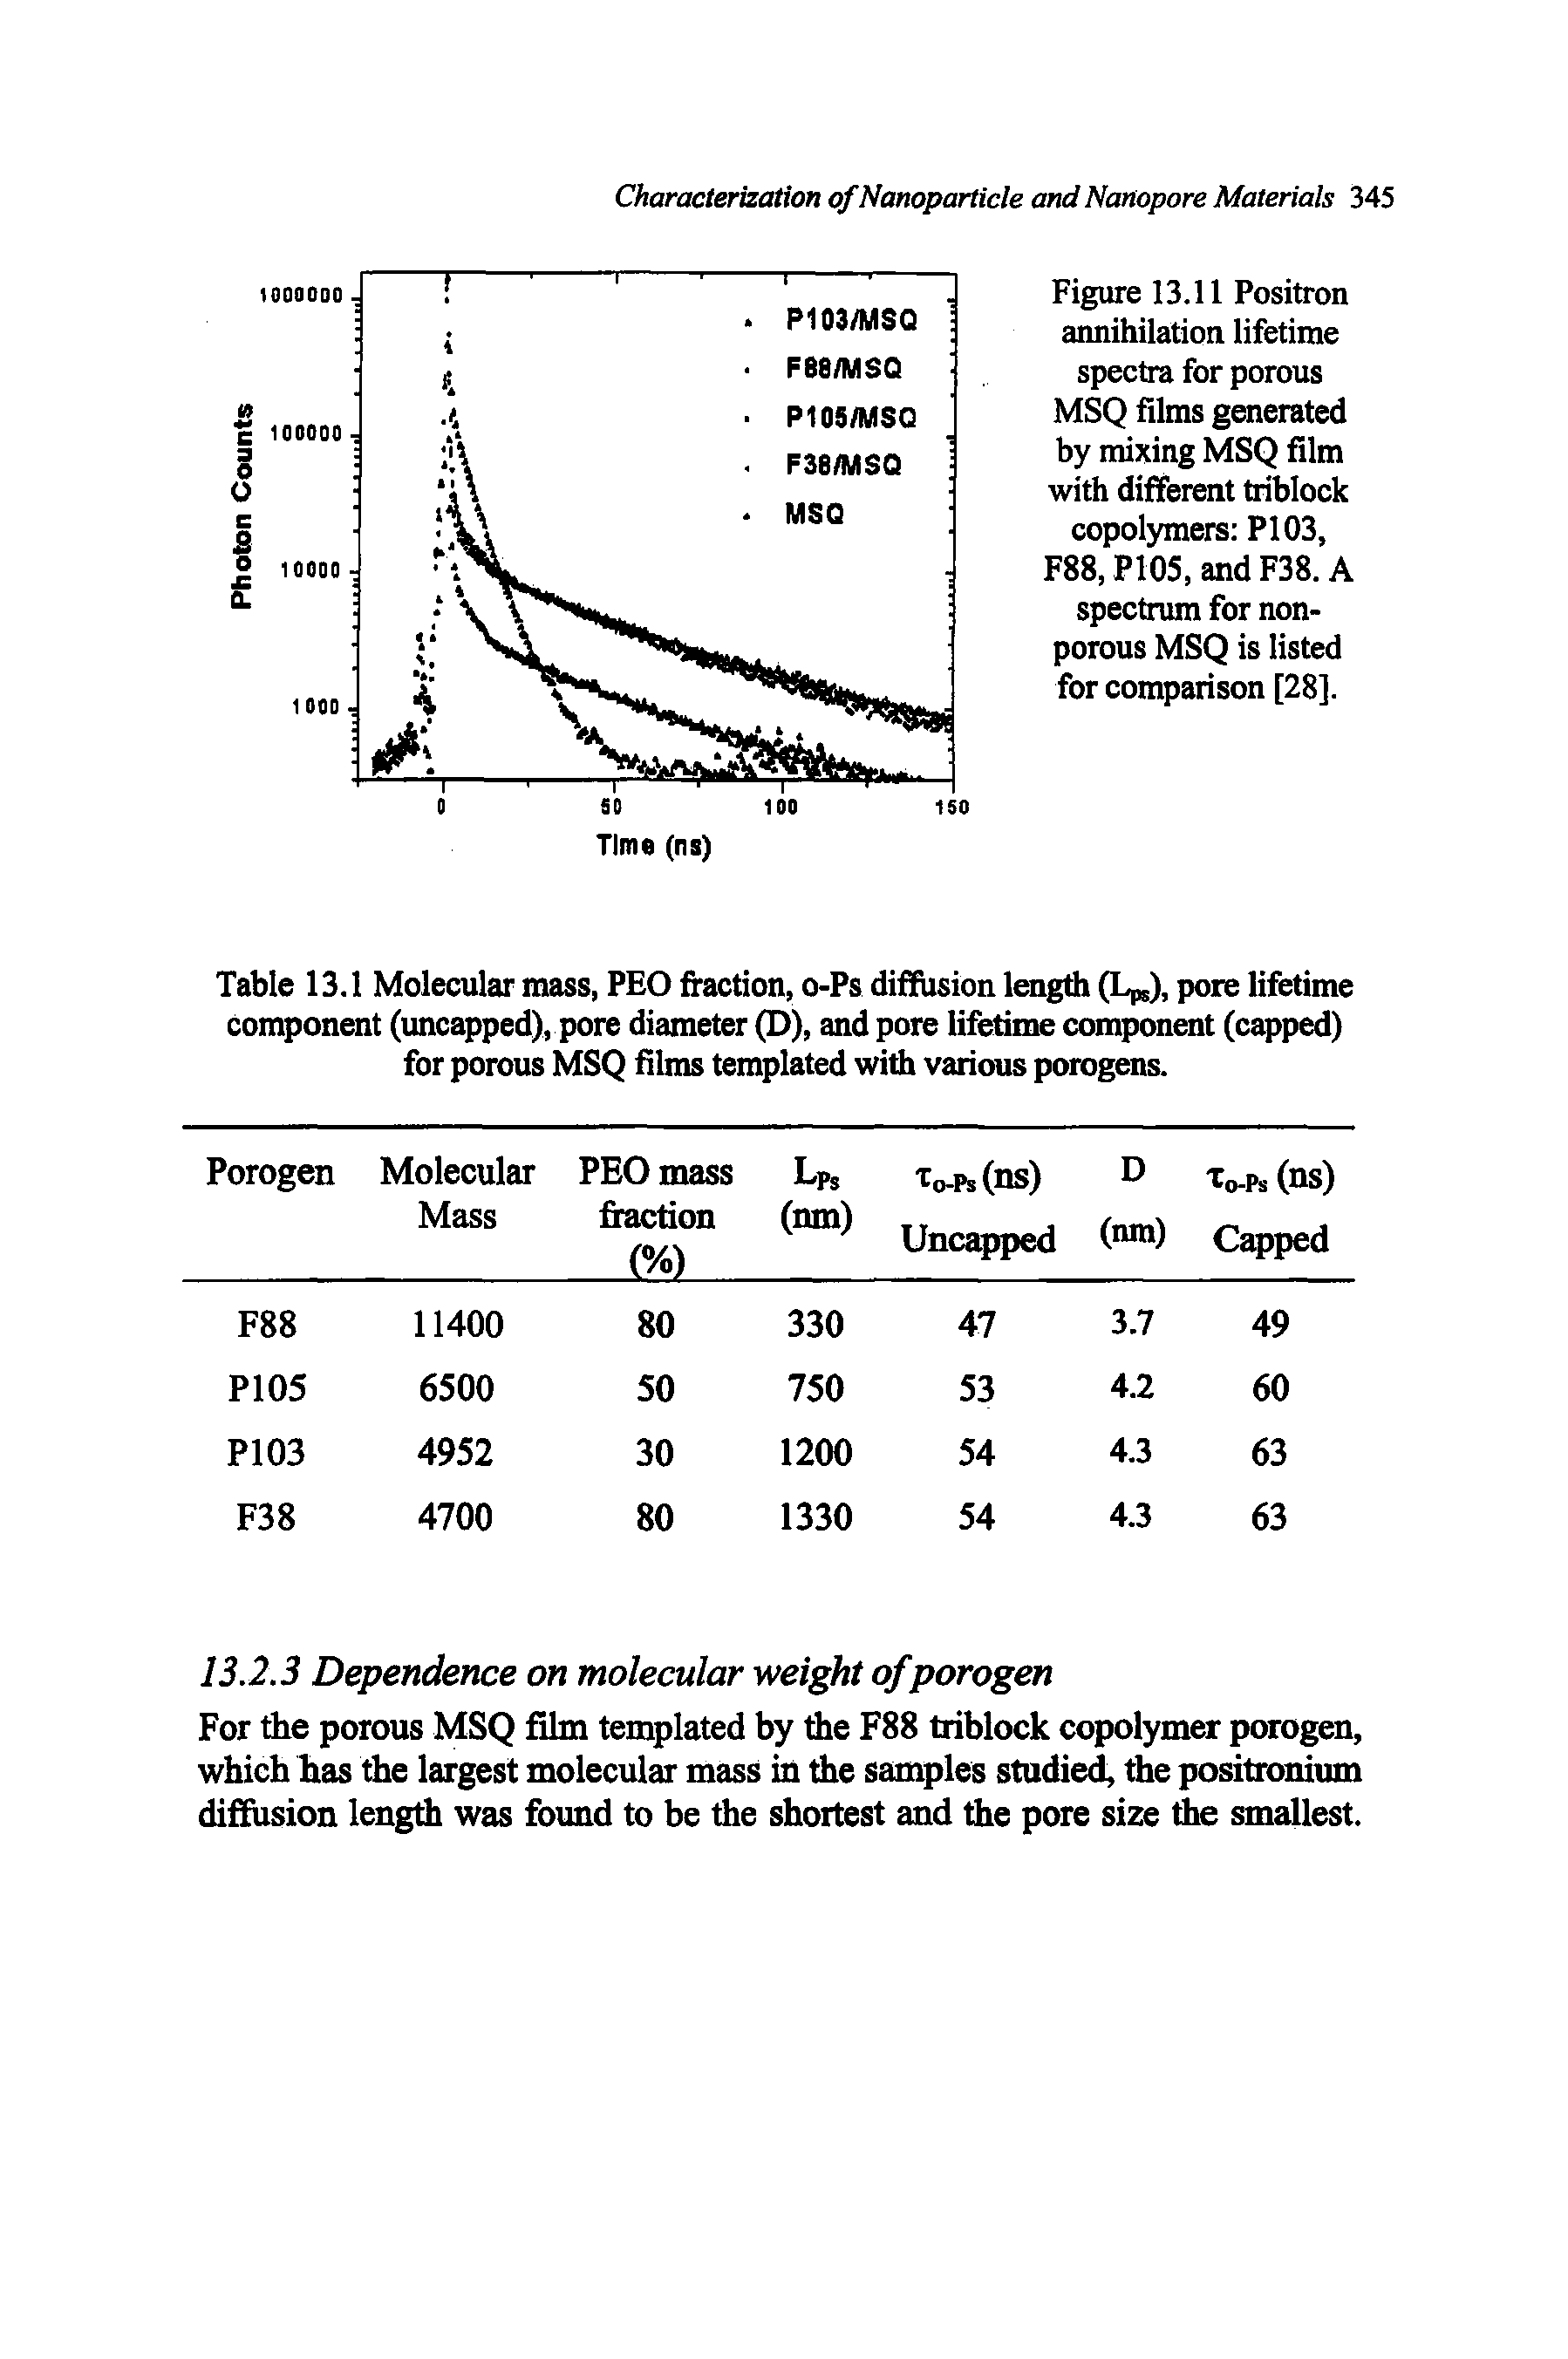 Figure 13.11 Positron annihilation lifetime spectra for porous MSQ films generated by mixing MSQ film with different triblock copolymers PI 03, F88, P105, and F38. A spectrum for non-porous MSQ is listed for comparison [28].